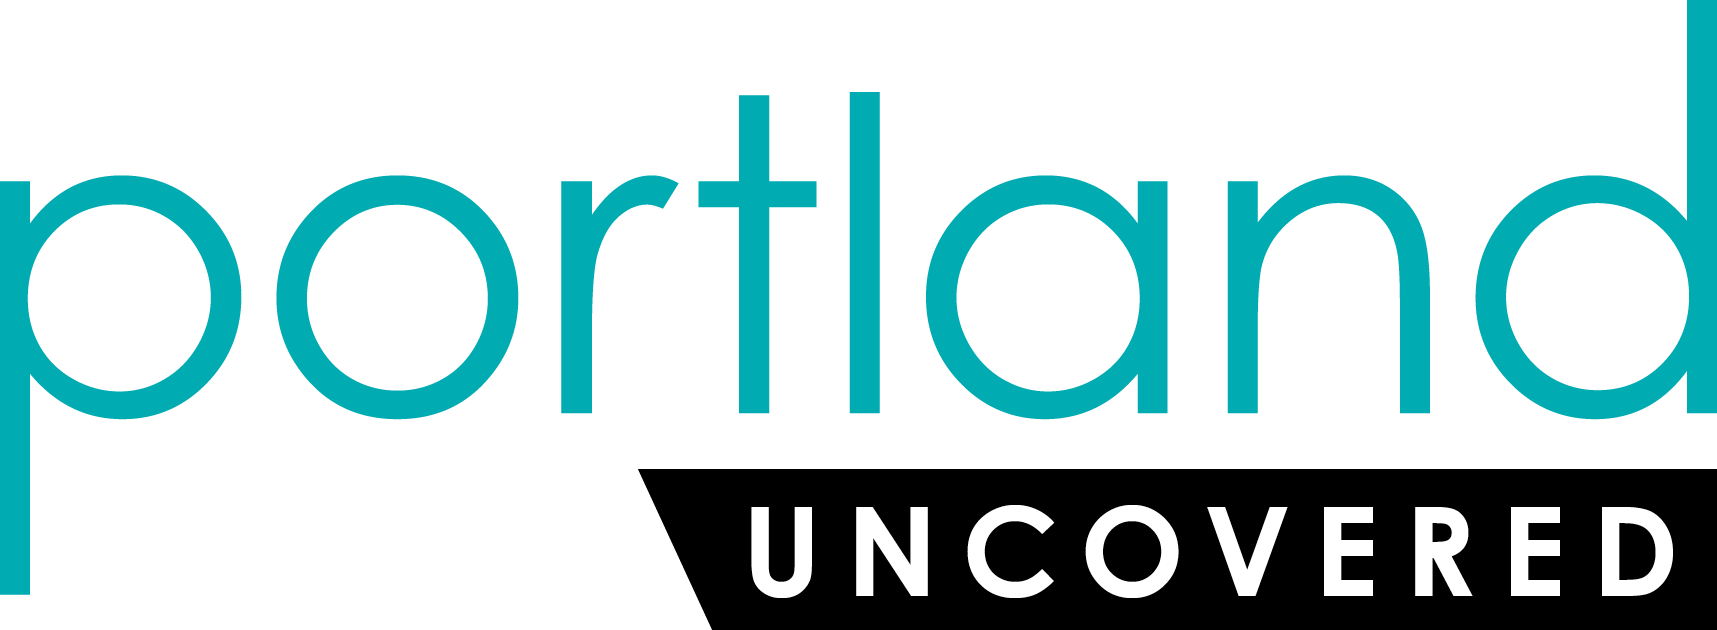 Portland Uncovered